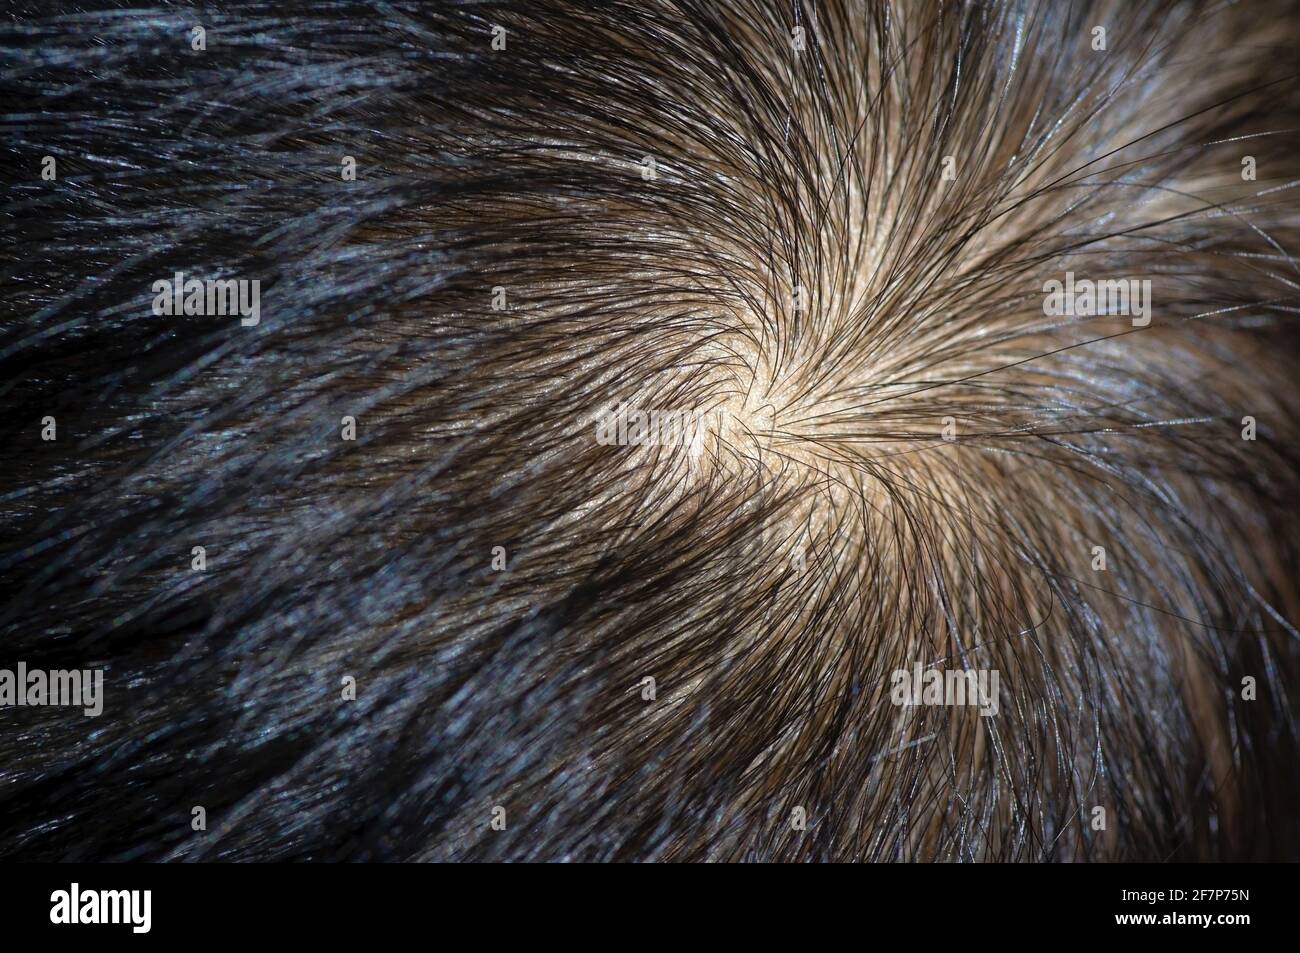 A hair whorl, a circular direction around center point on the human head, selected focus Stock Photo